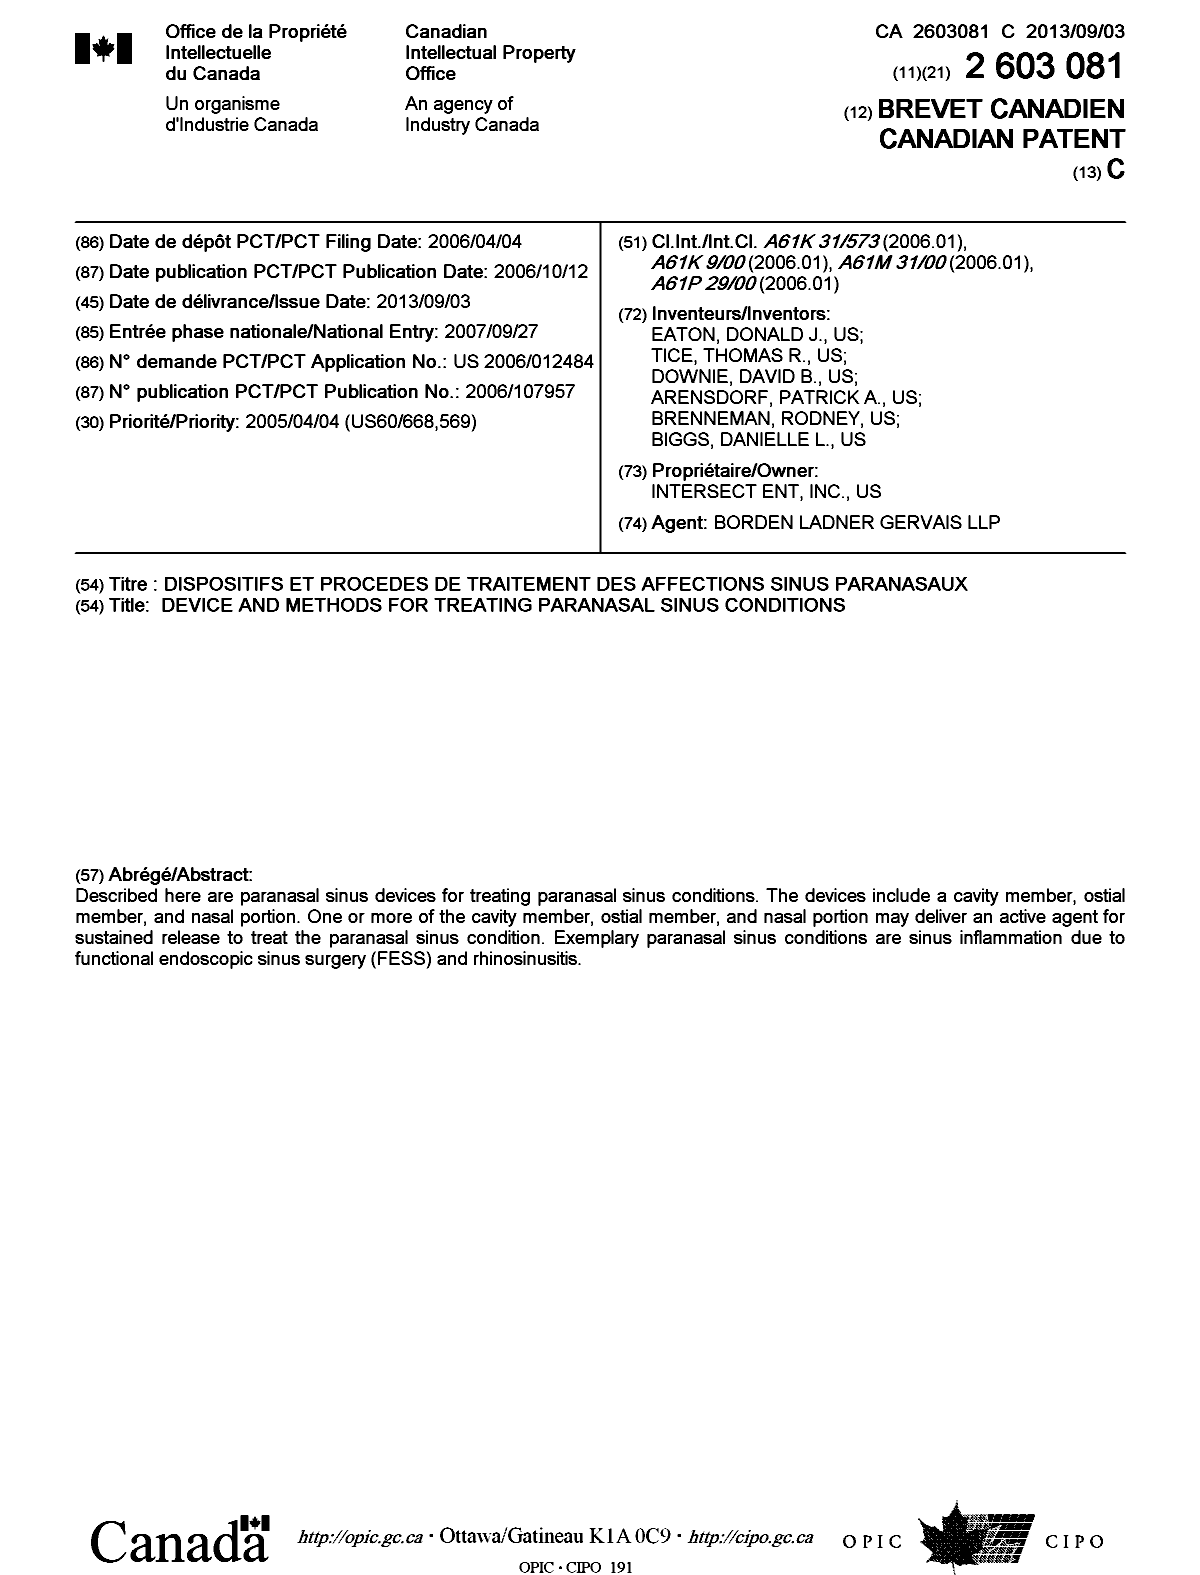 Canadian Patent Document 2603081. Cover Page 20130807. Image 1 of 1